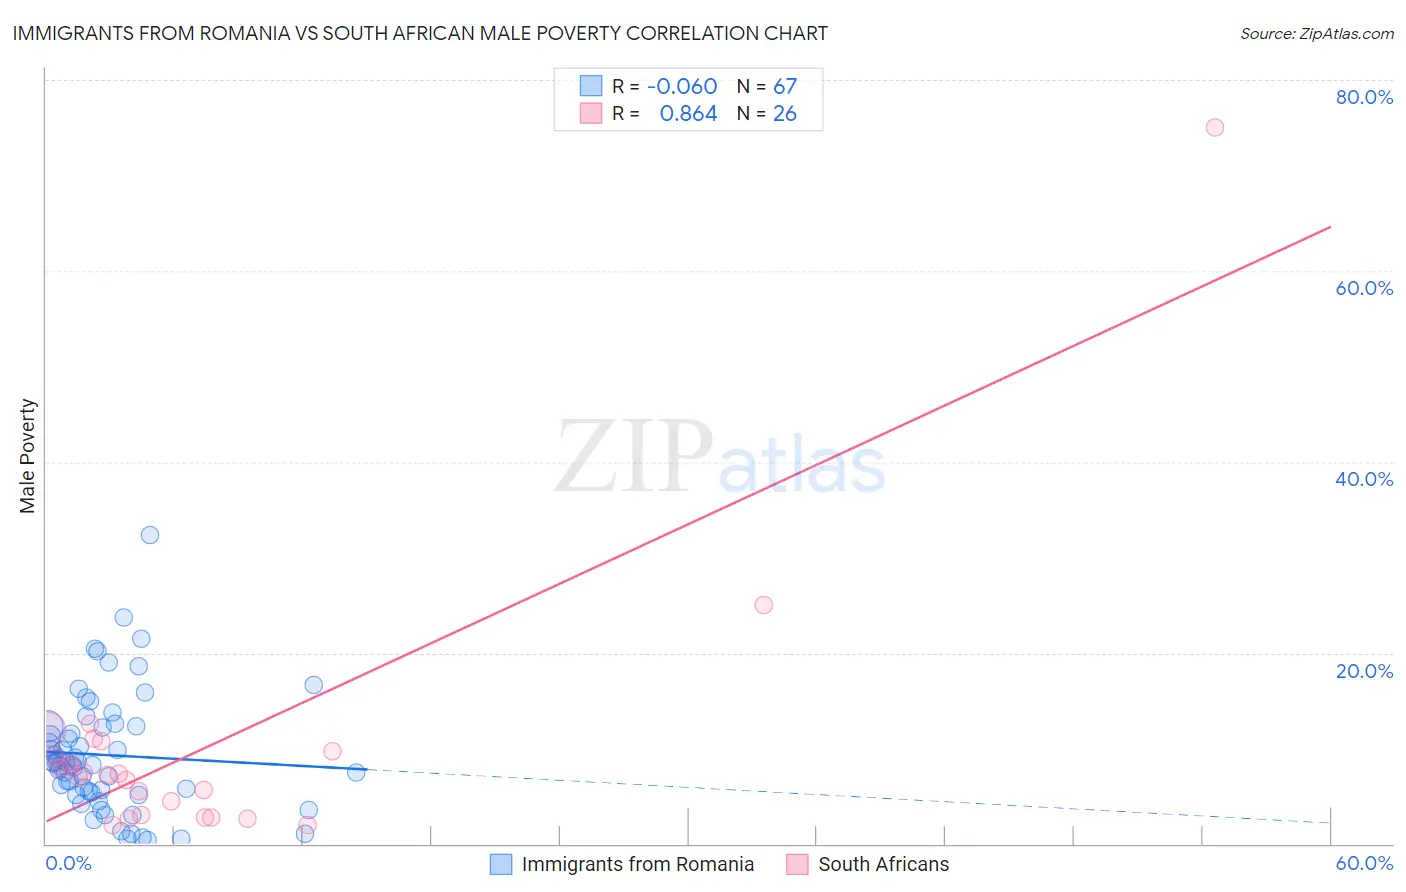 Immigrants from Romania vs South African Male Poverty